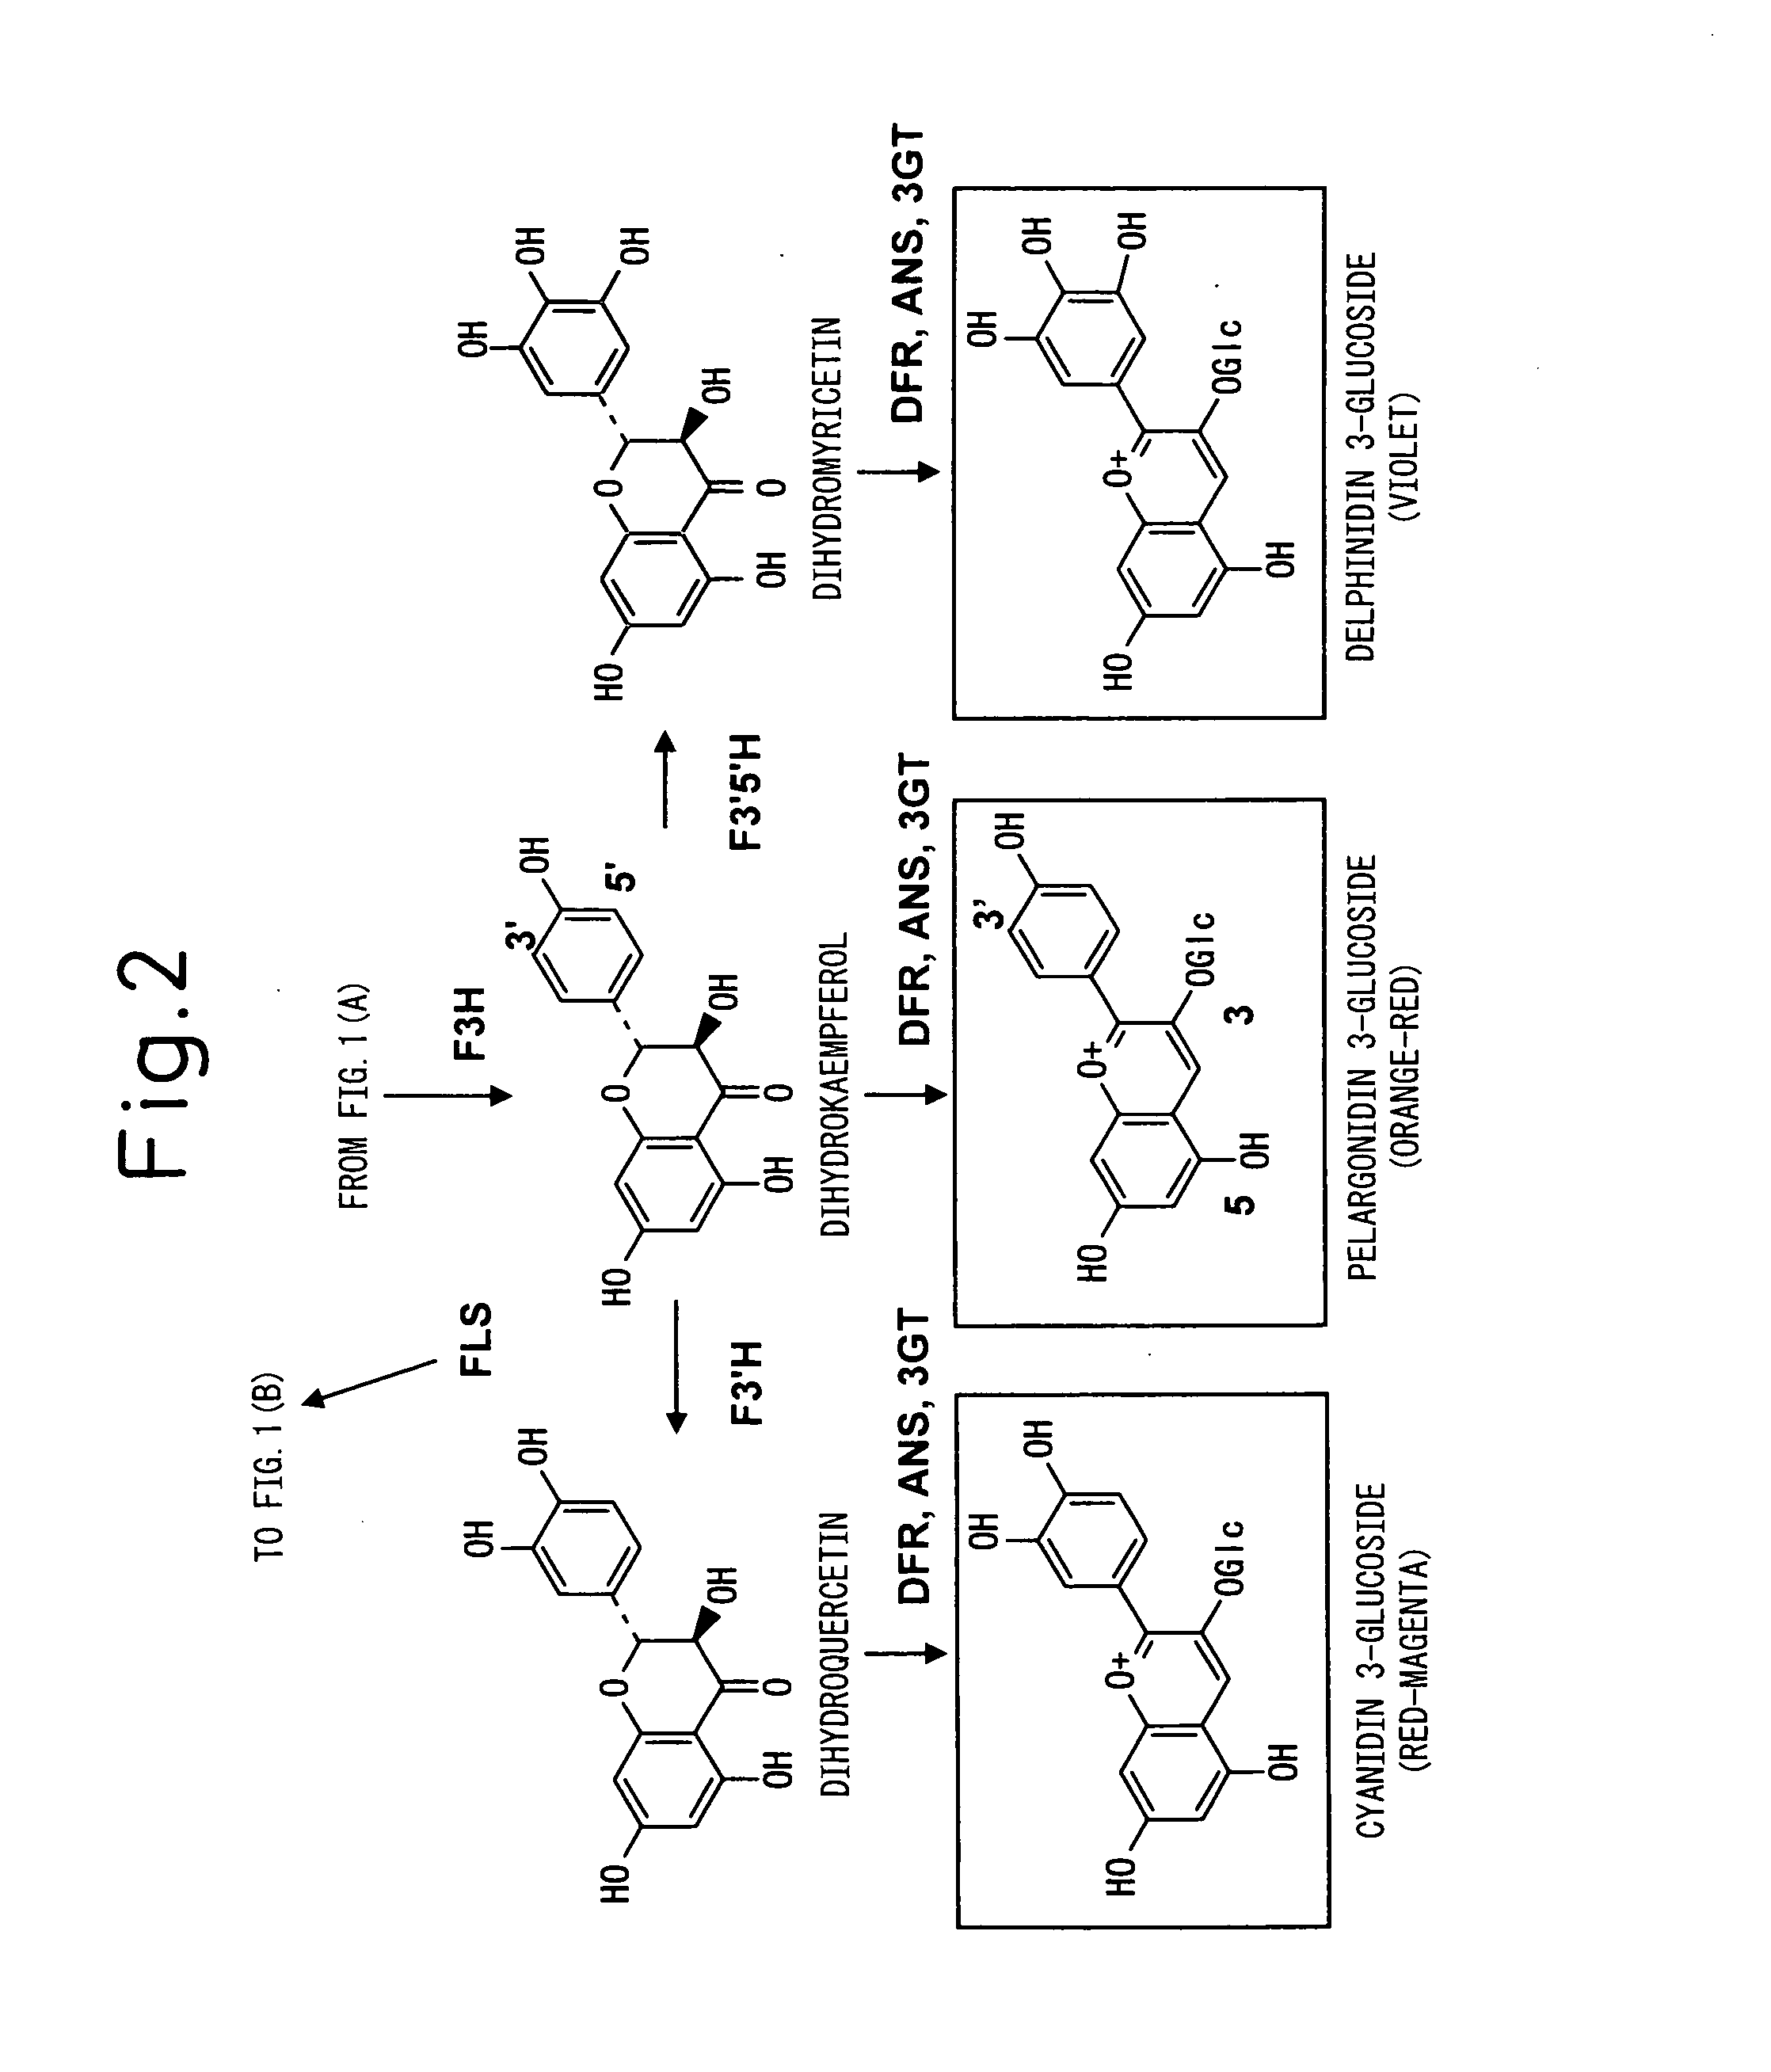 Method for Producing Yellow Flower by Controlling Flavonoid Synthetic Pathway